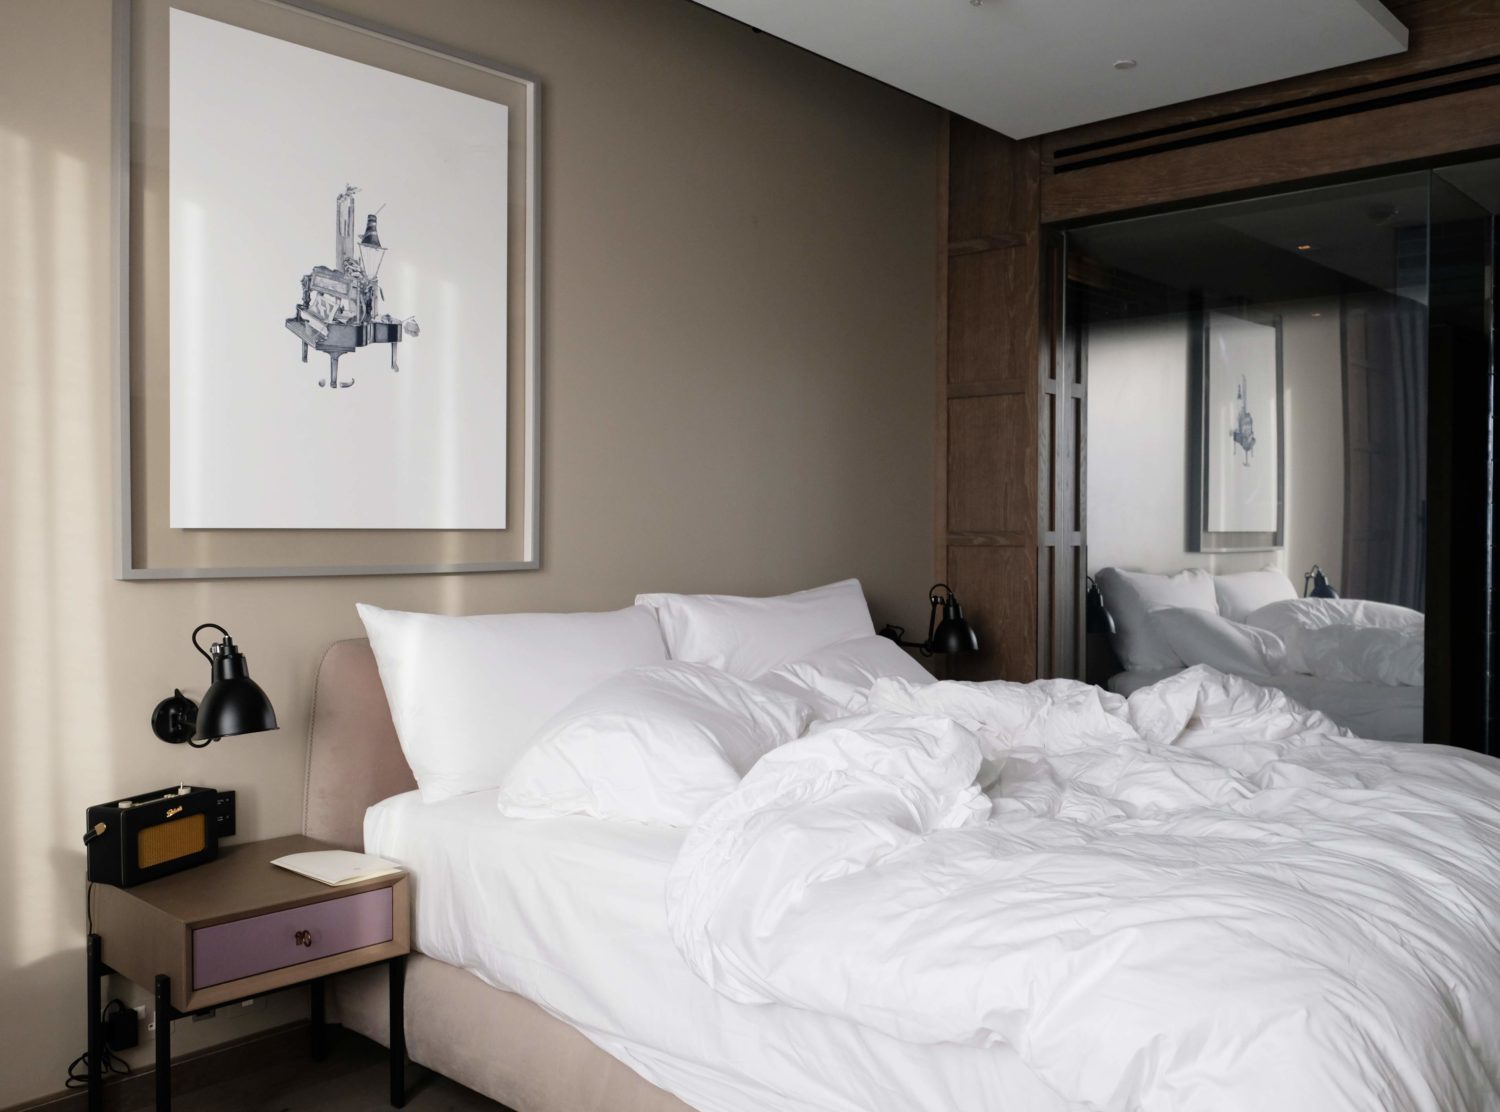 The Londoner What I look for in a hotel room is a high quality refuge, a space to reset and put life on pause. The Londoner's room does exactly that. Uncomplicated and chic, it is a breath of fresh air